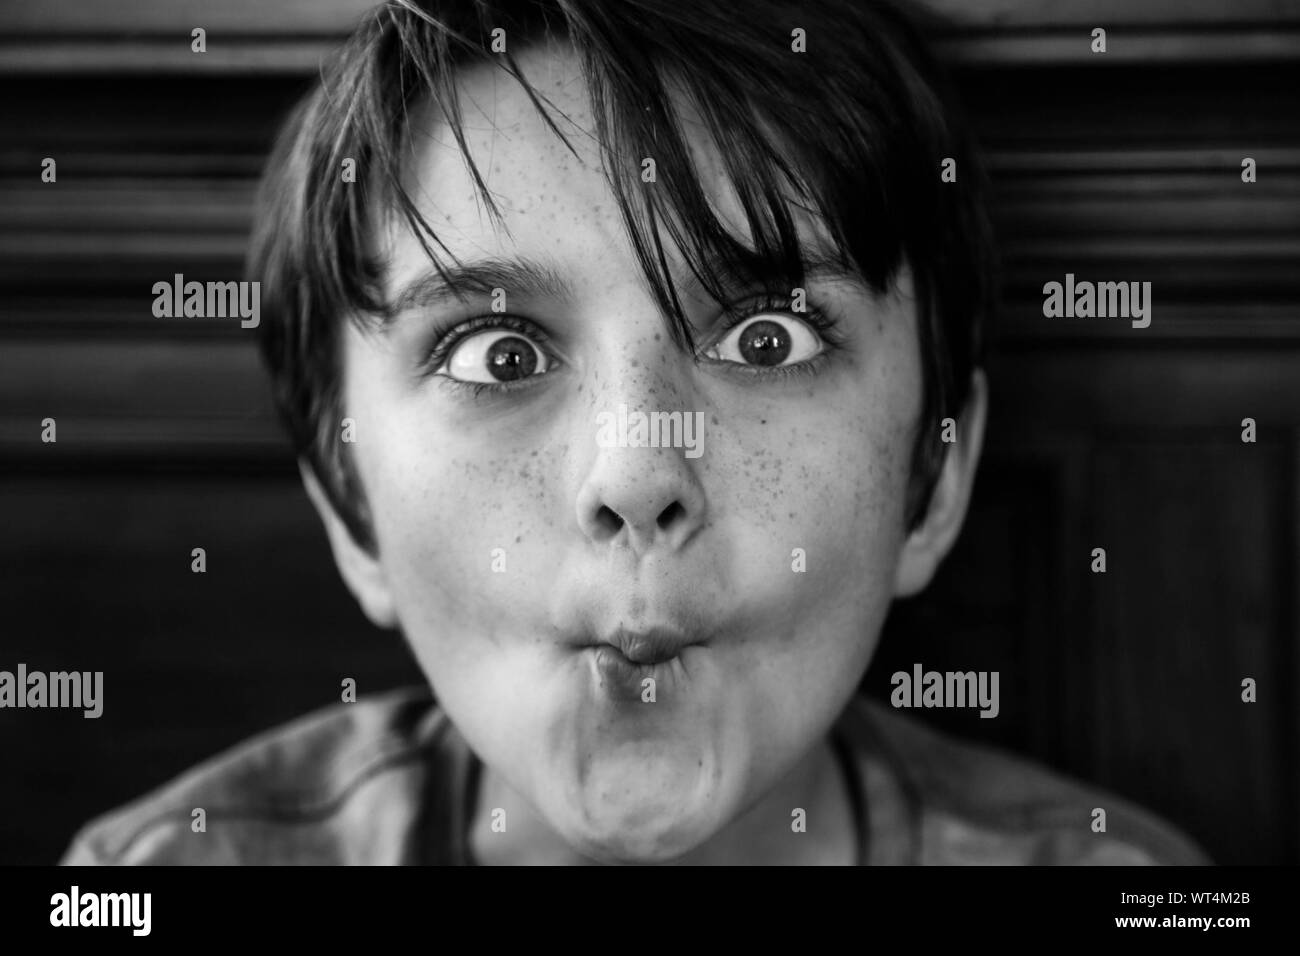 Young Boy Making Silly Face Stock Photo